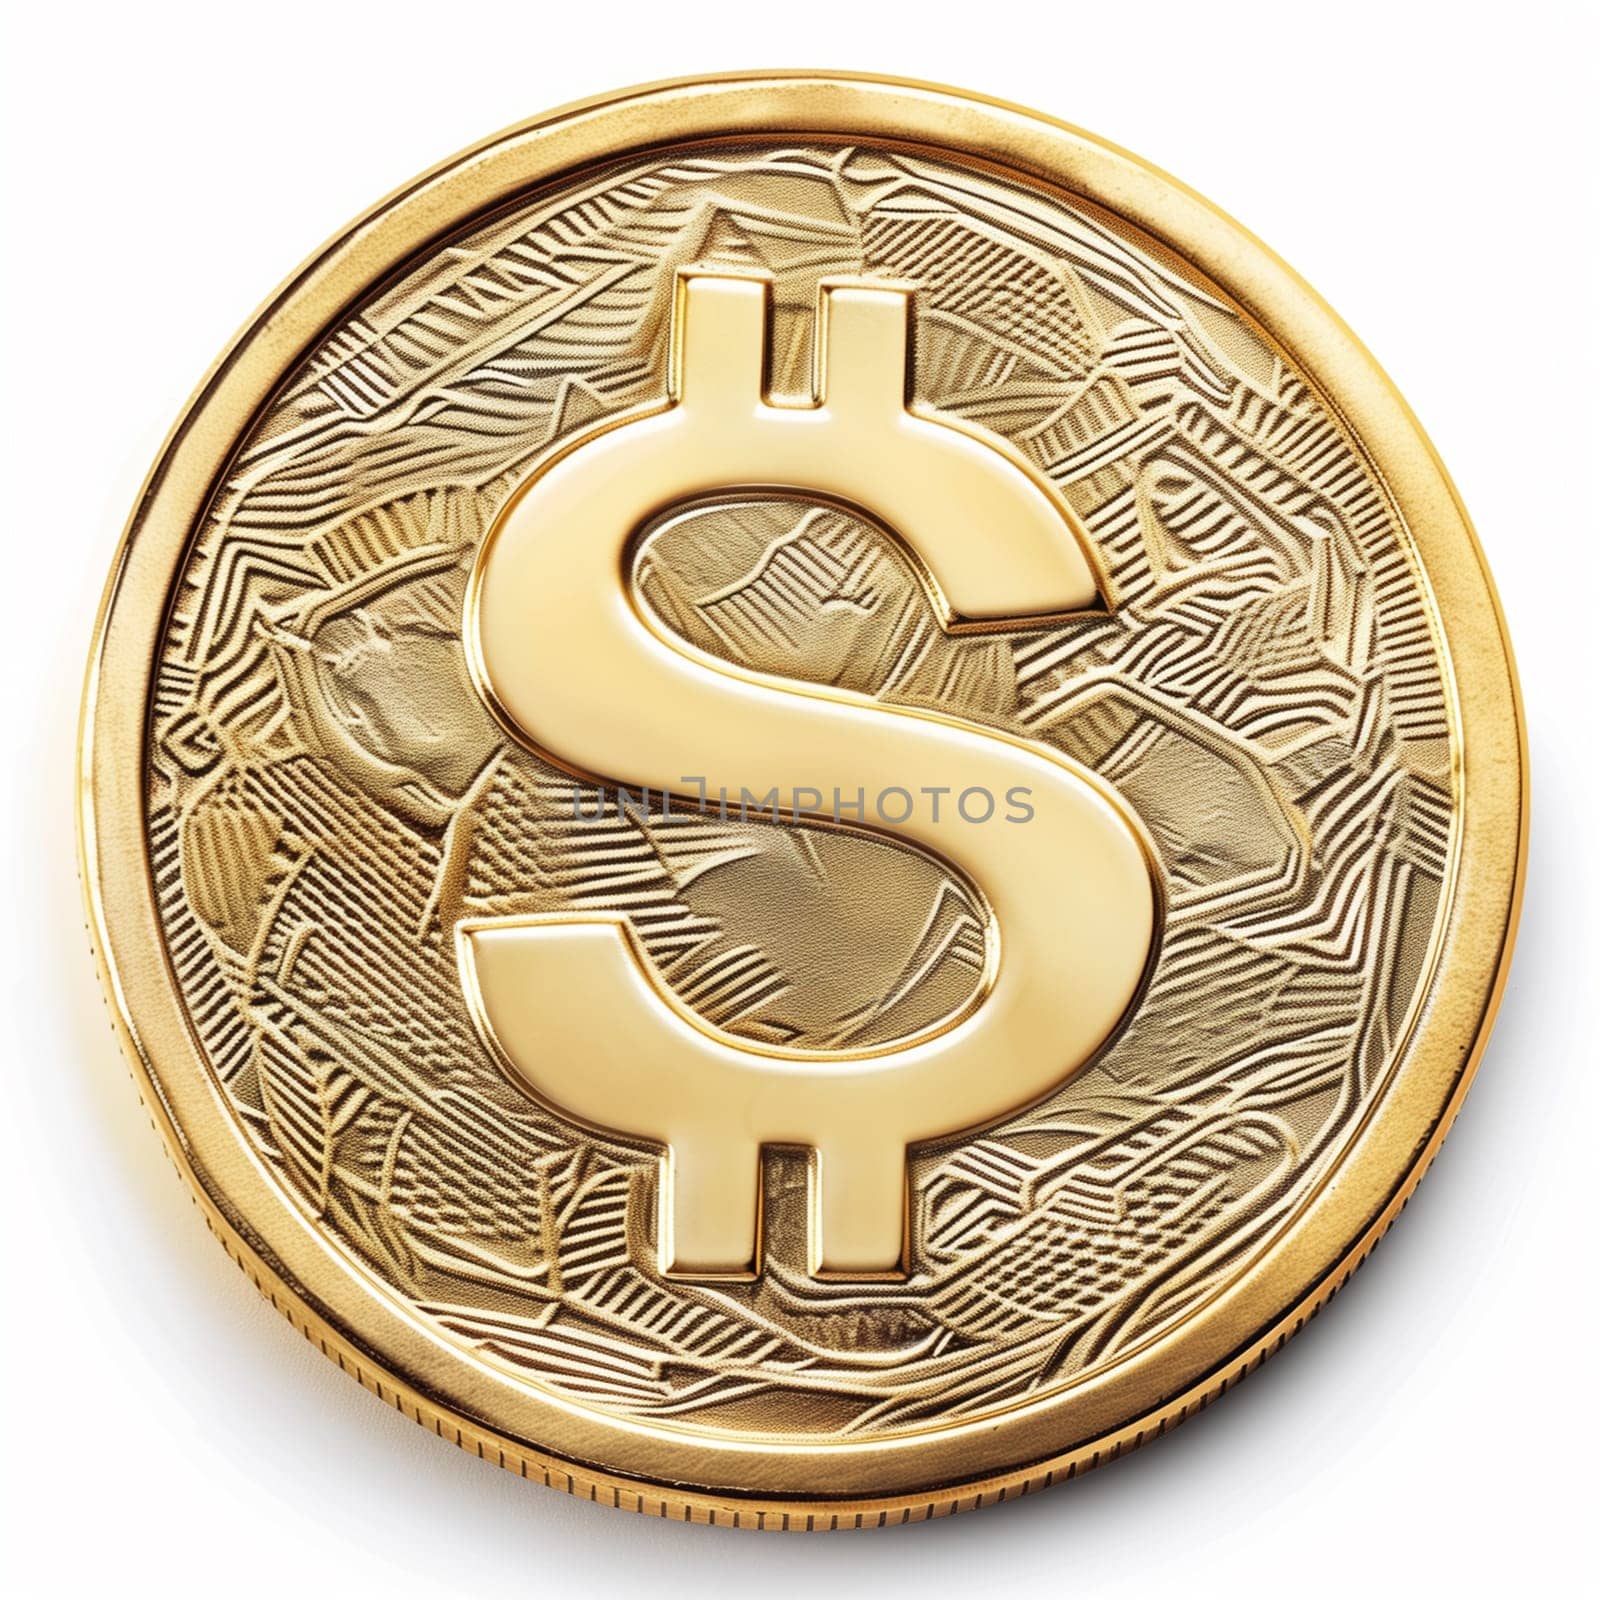 A shiny gold coin featuring a prominent dollar sign symbol on its surface.